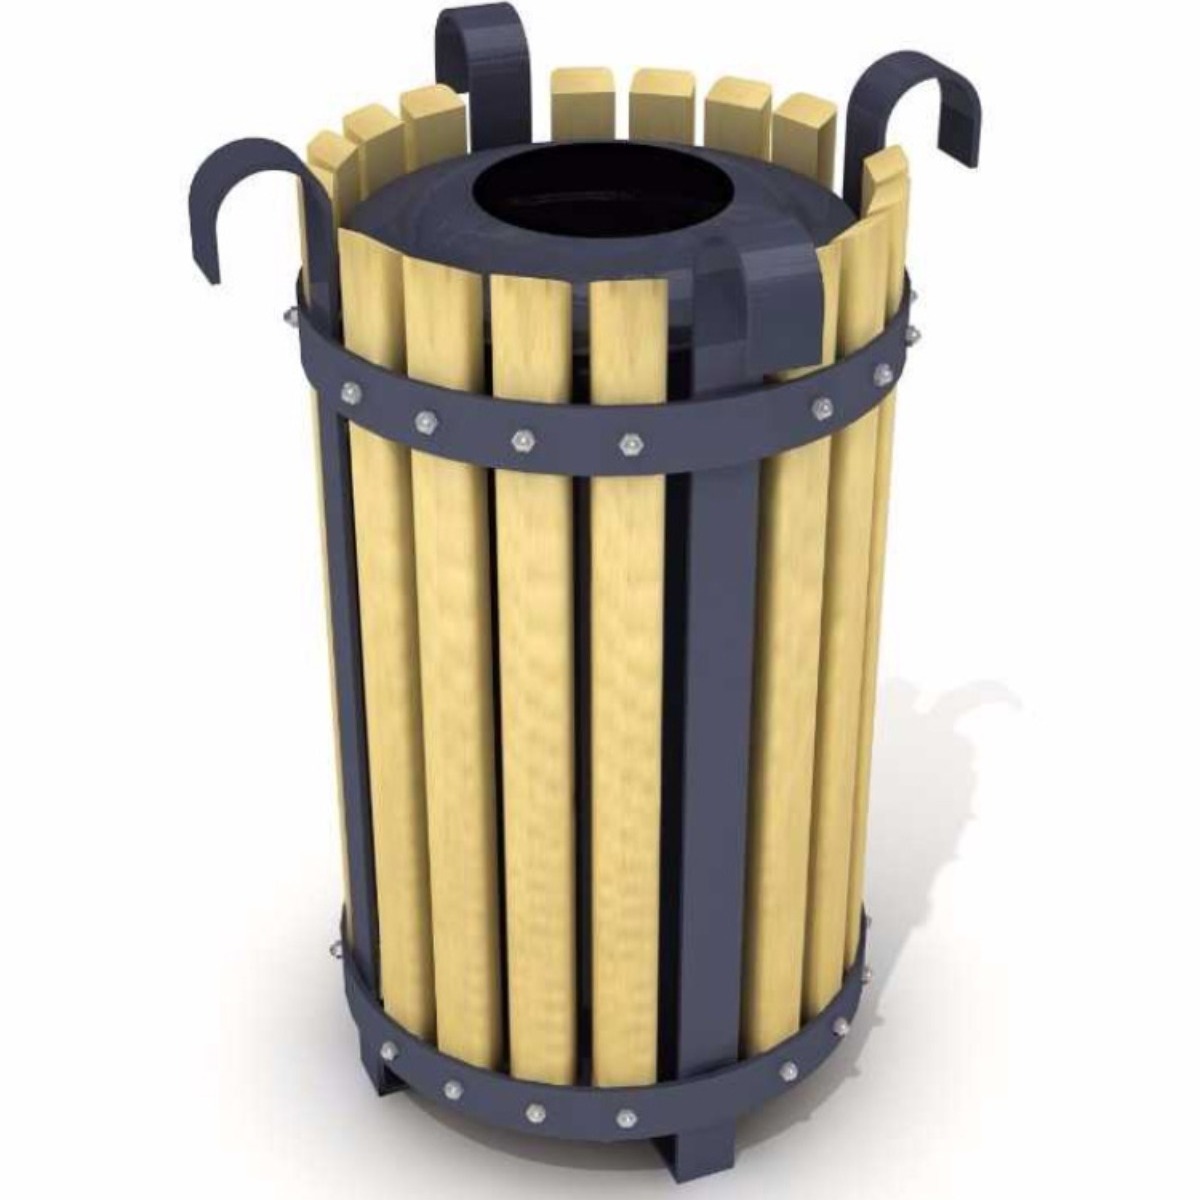 AB-503 Wood Open Space Trash Can product logo